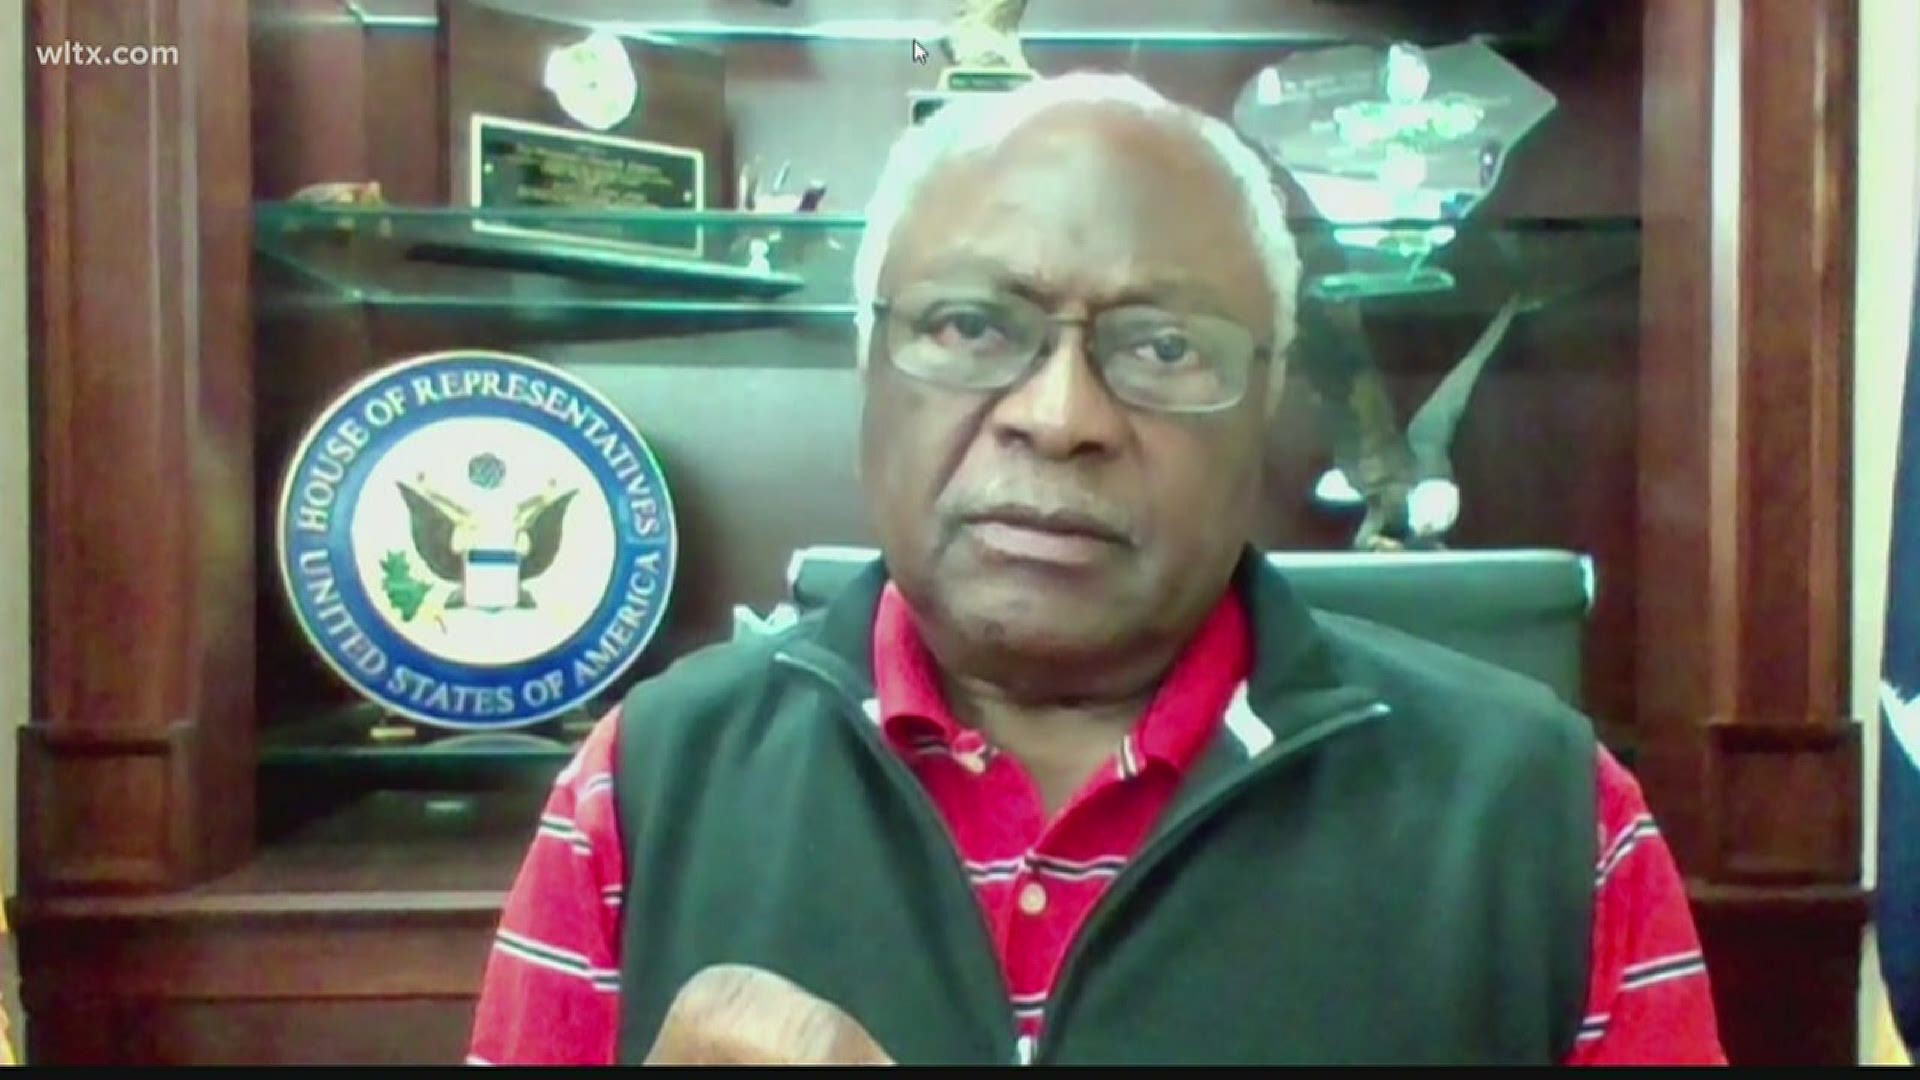 6th District Congressman Jim Clyburn urged protesters to keep the faith and stay engaged as protests in the United States continue.